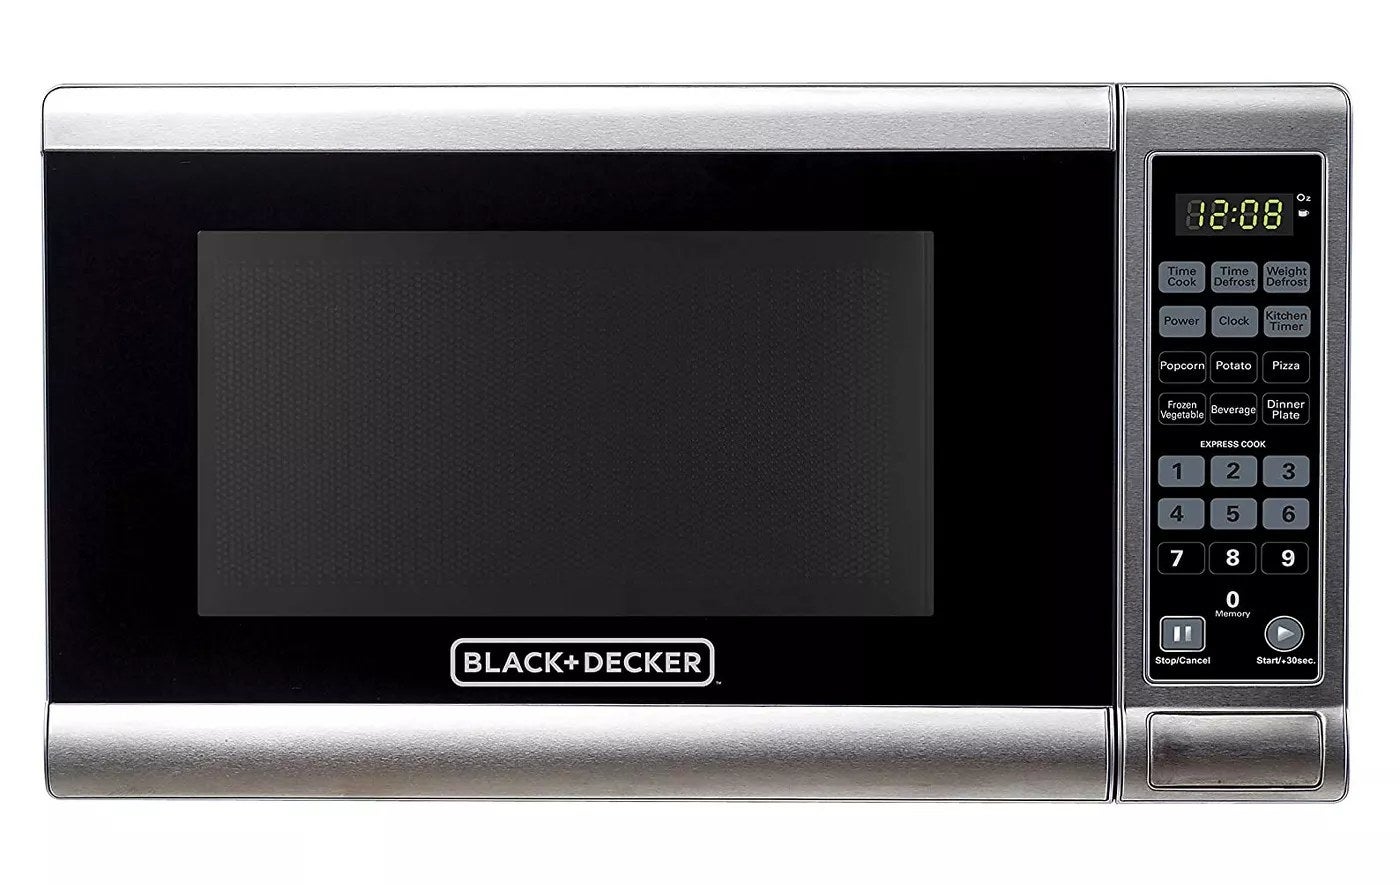 The Black+Decker microwave oven